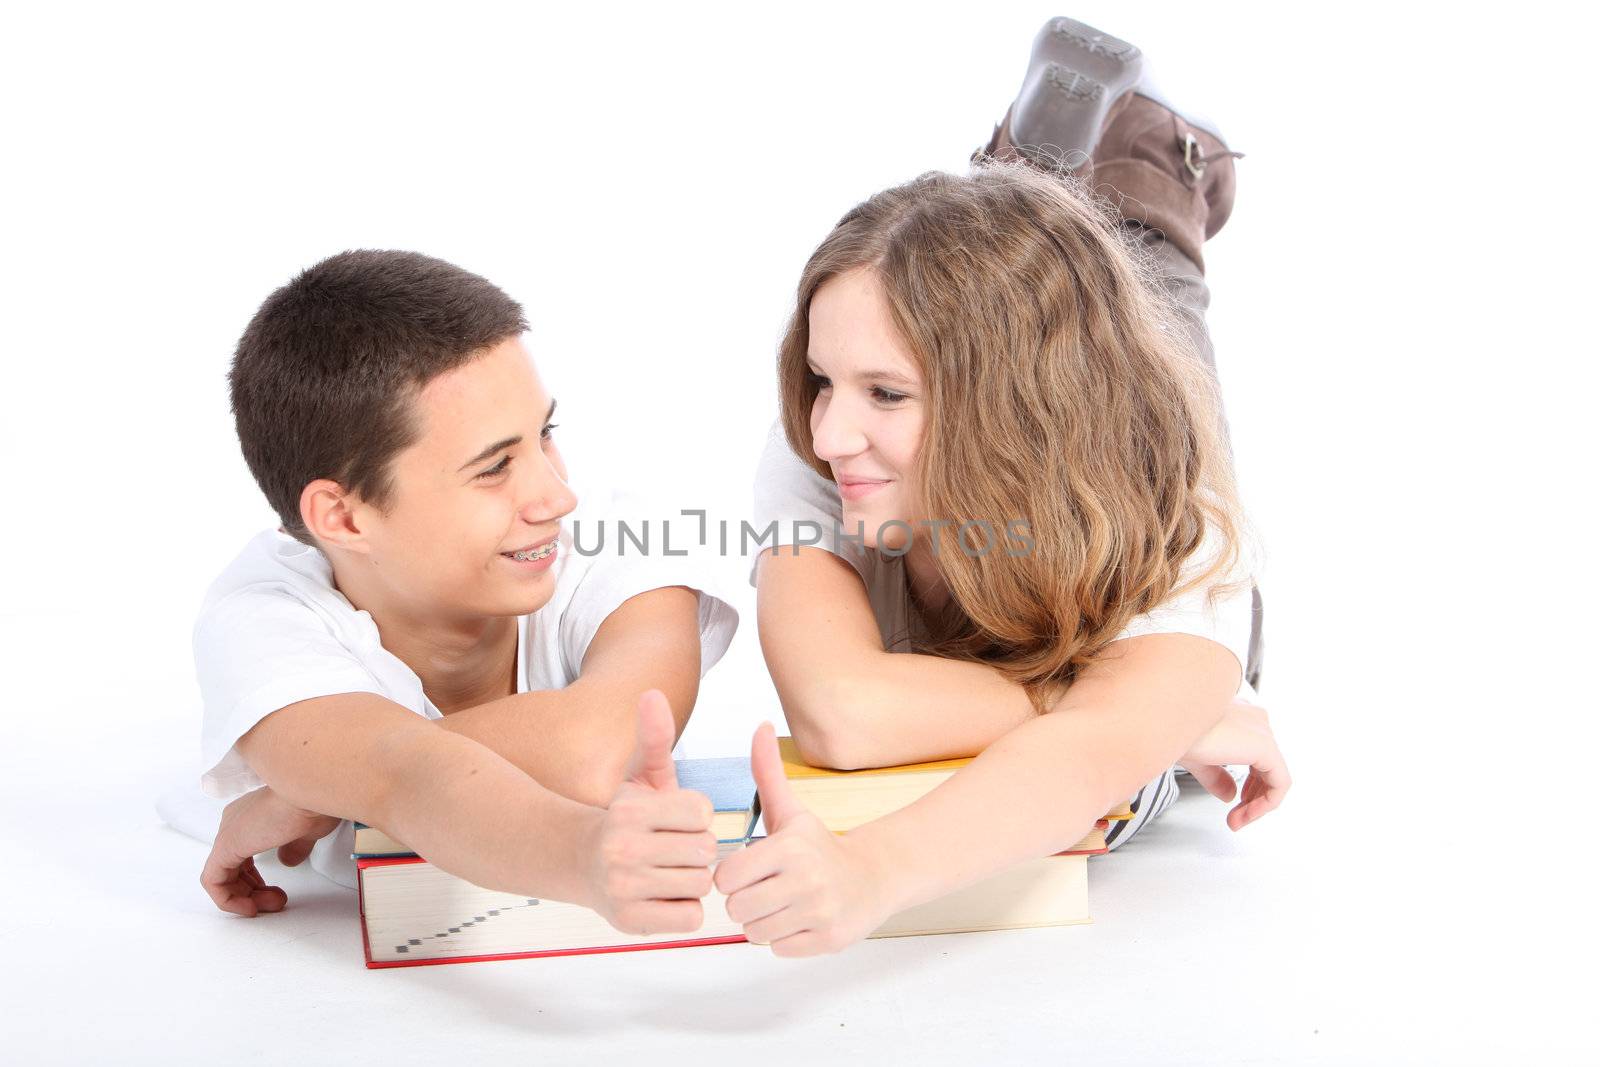 Teenage boy and girl with books giving thumbs up gesture isolated on white in studio